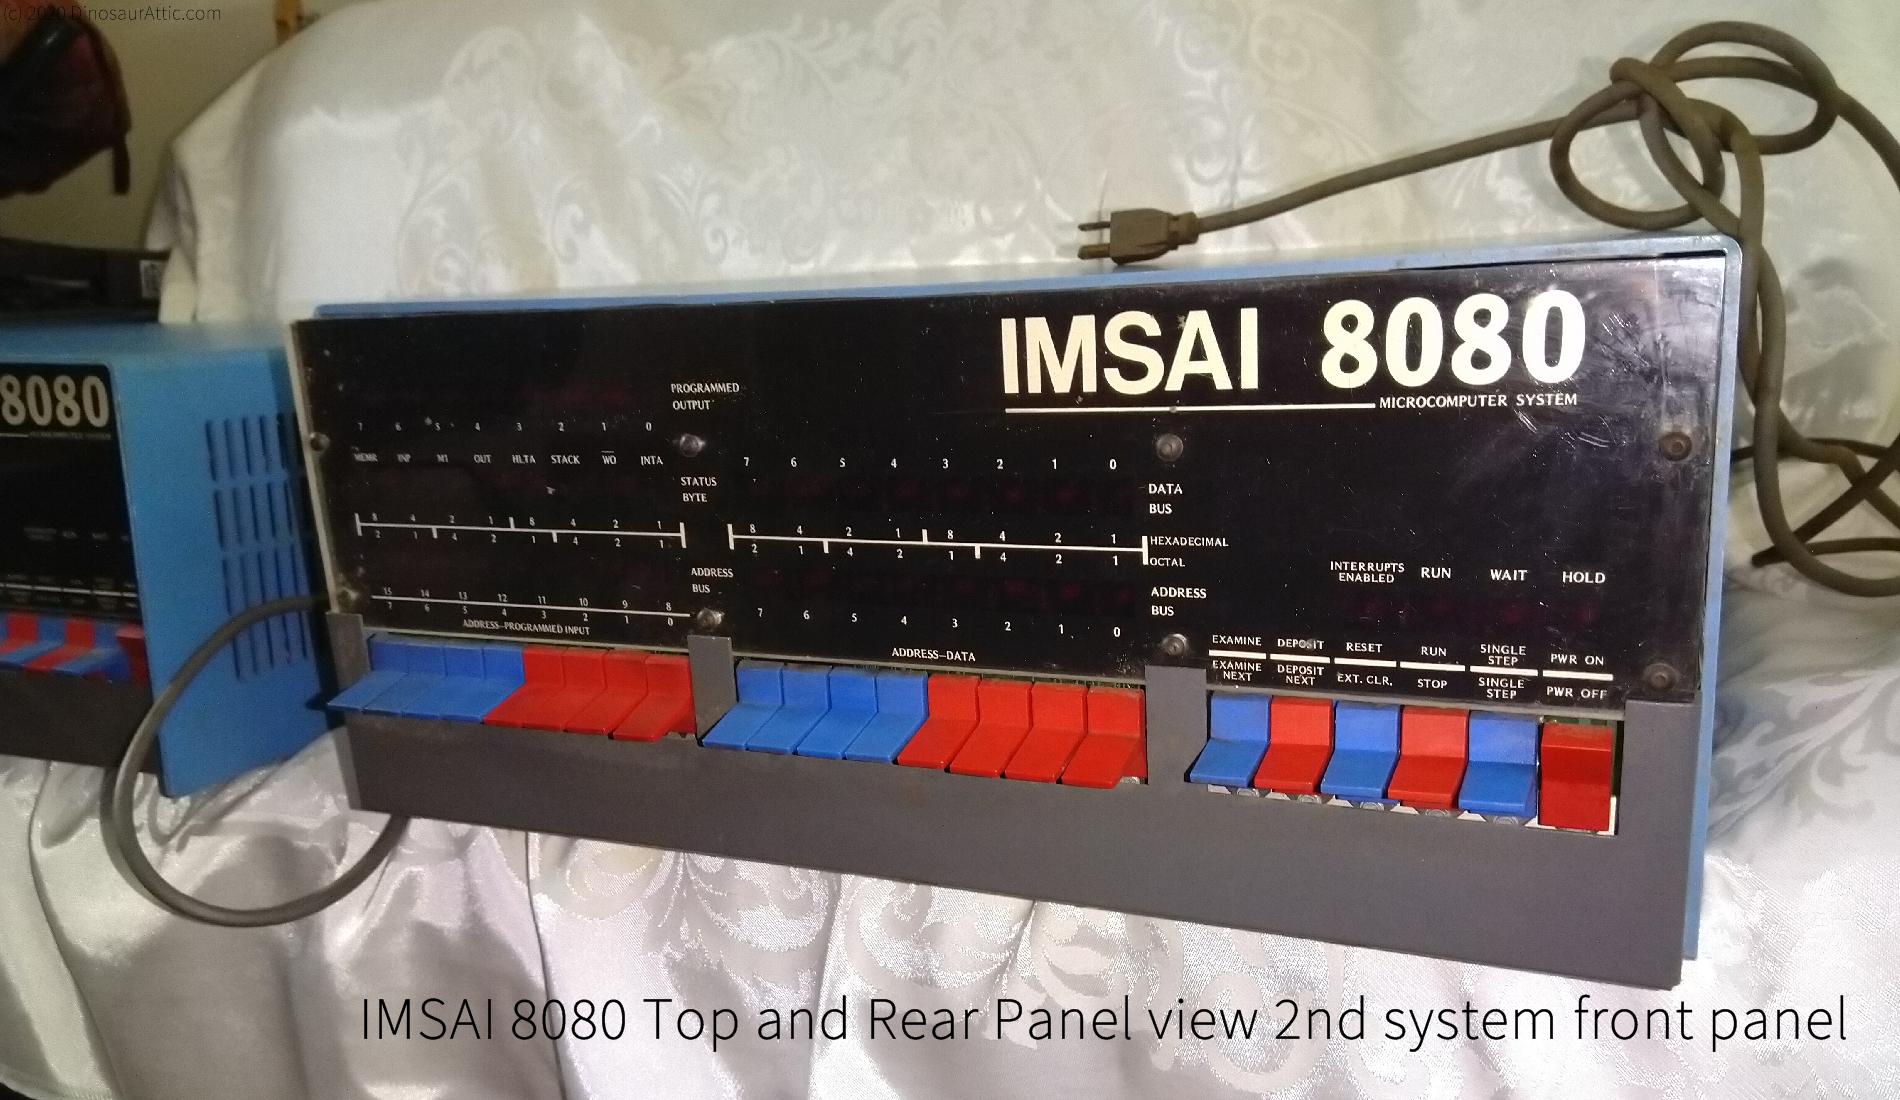 <b>IMSAI 8080 Top and Rear Panel view 2nd front panel</b>